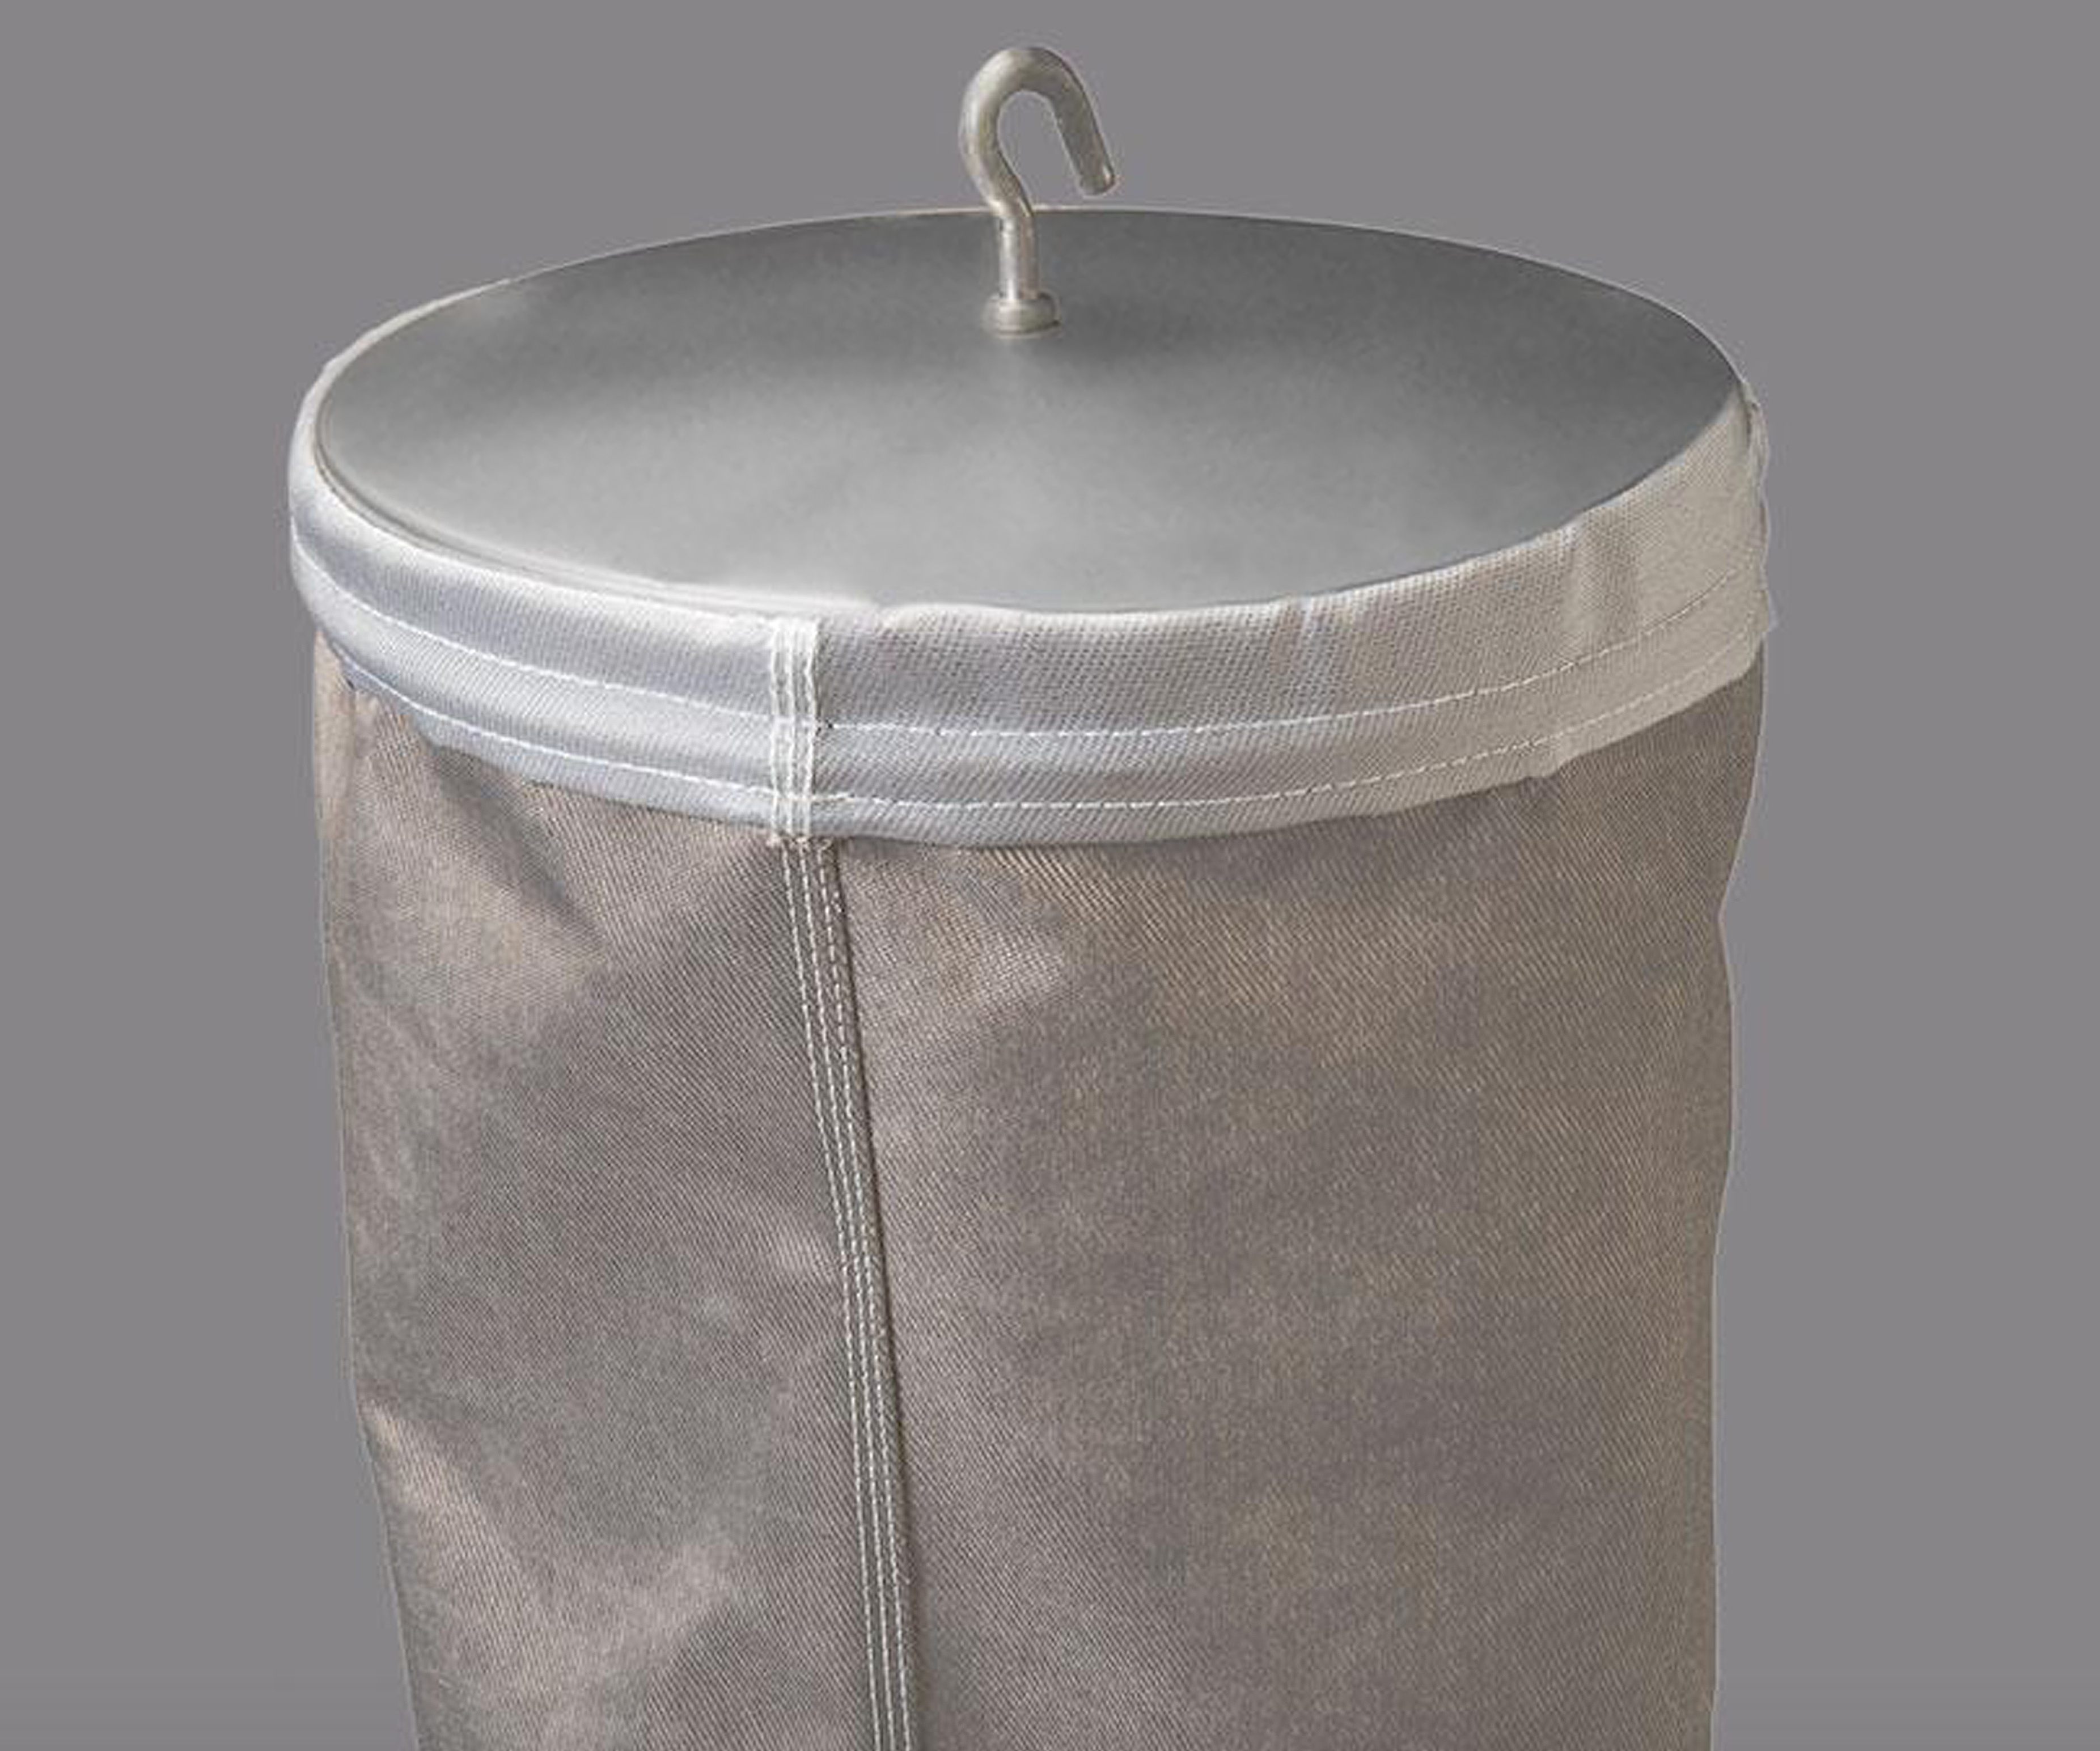 Primary Metal Filtration, GORE® Filter Bags for Metals Industry